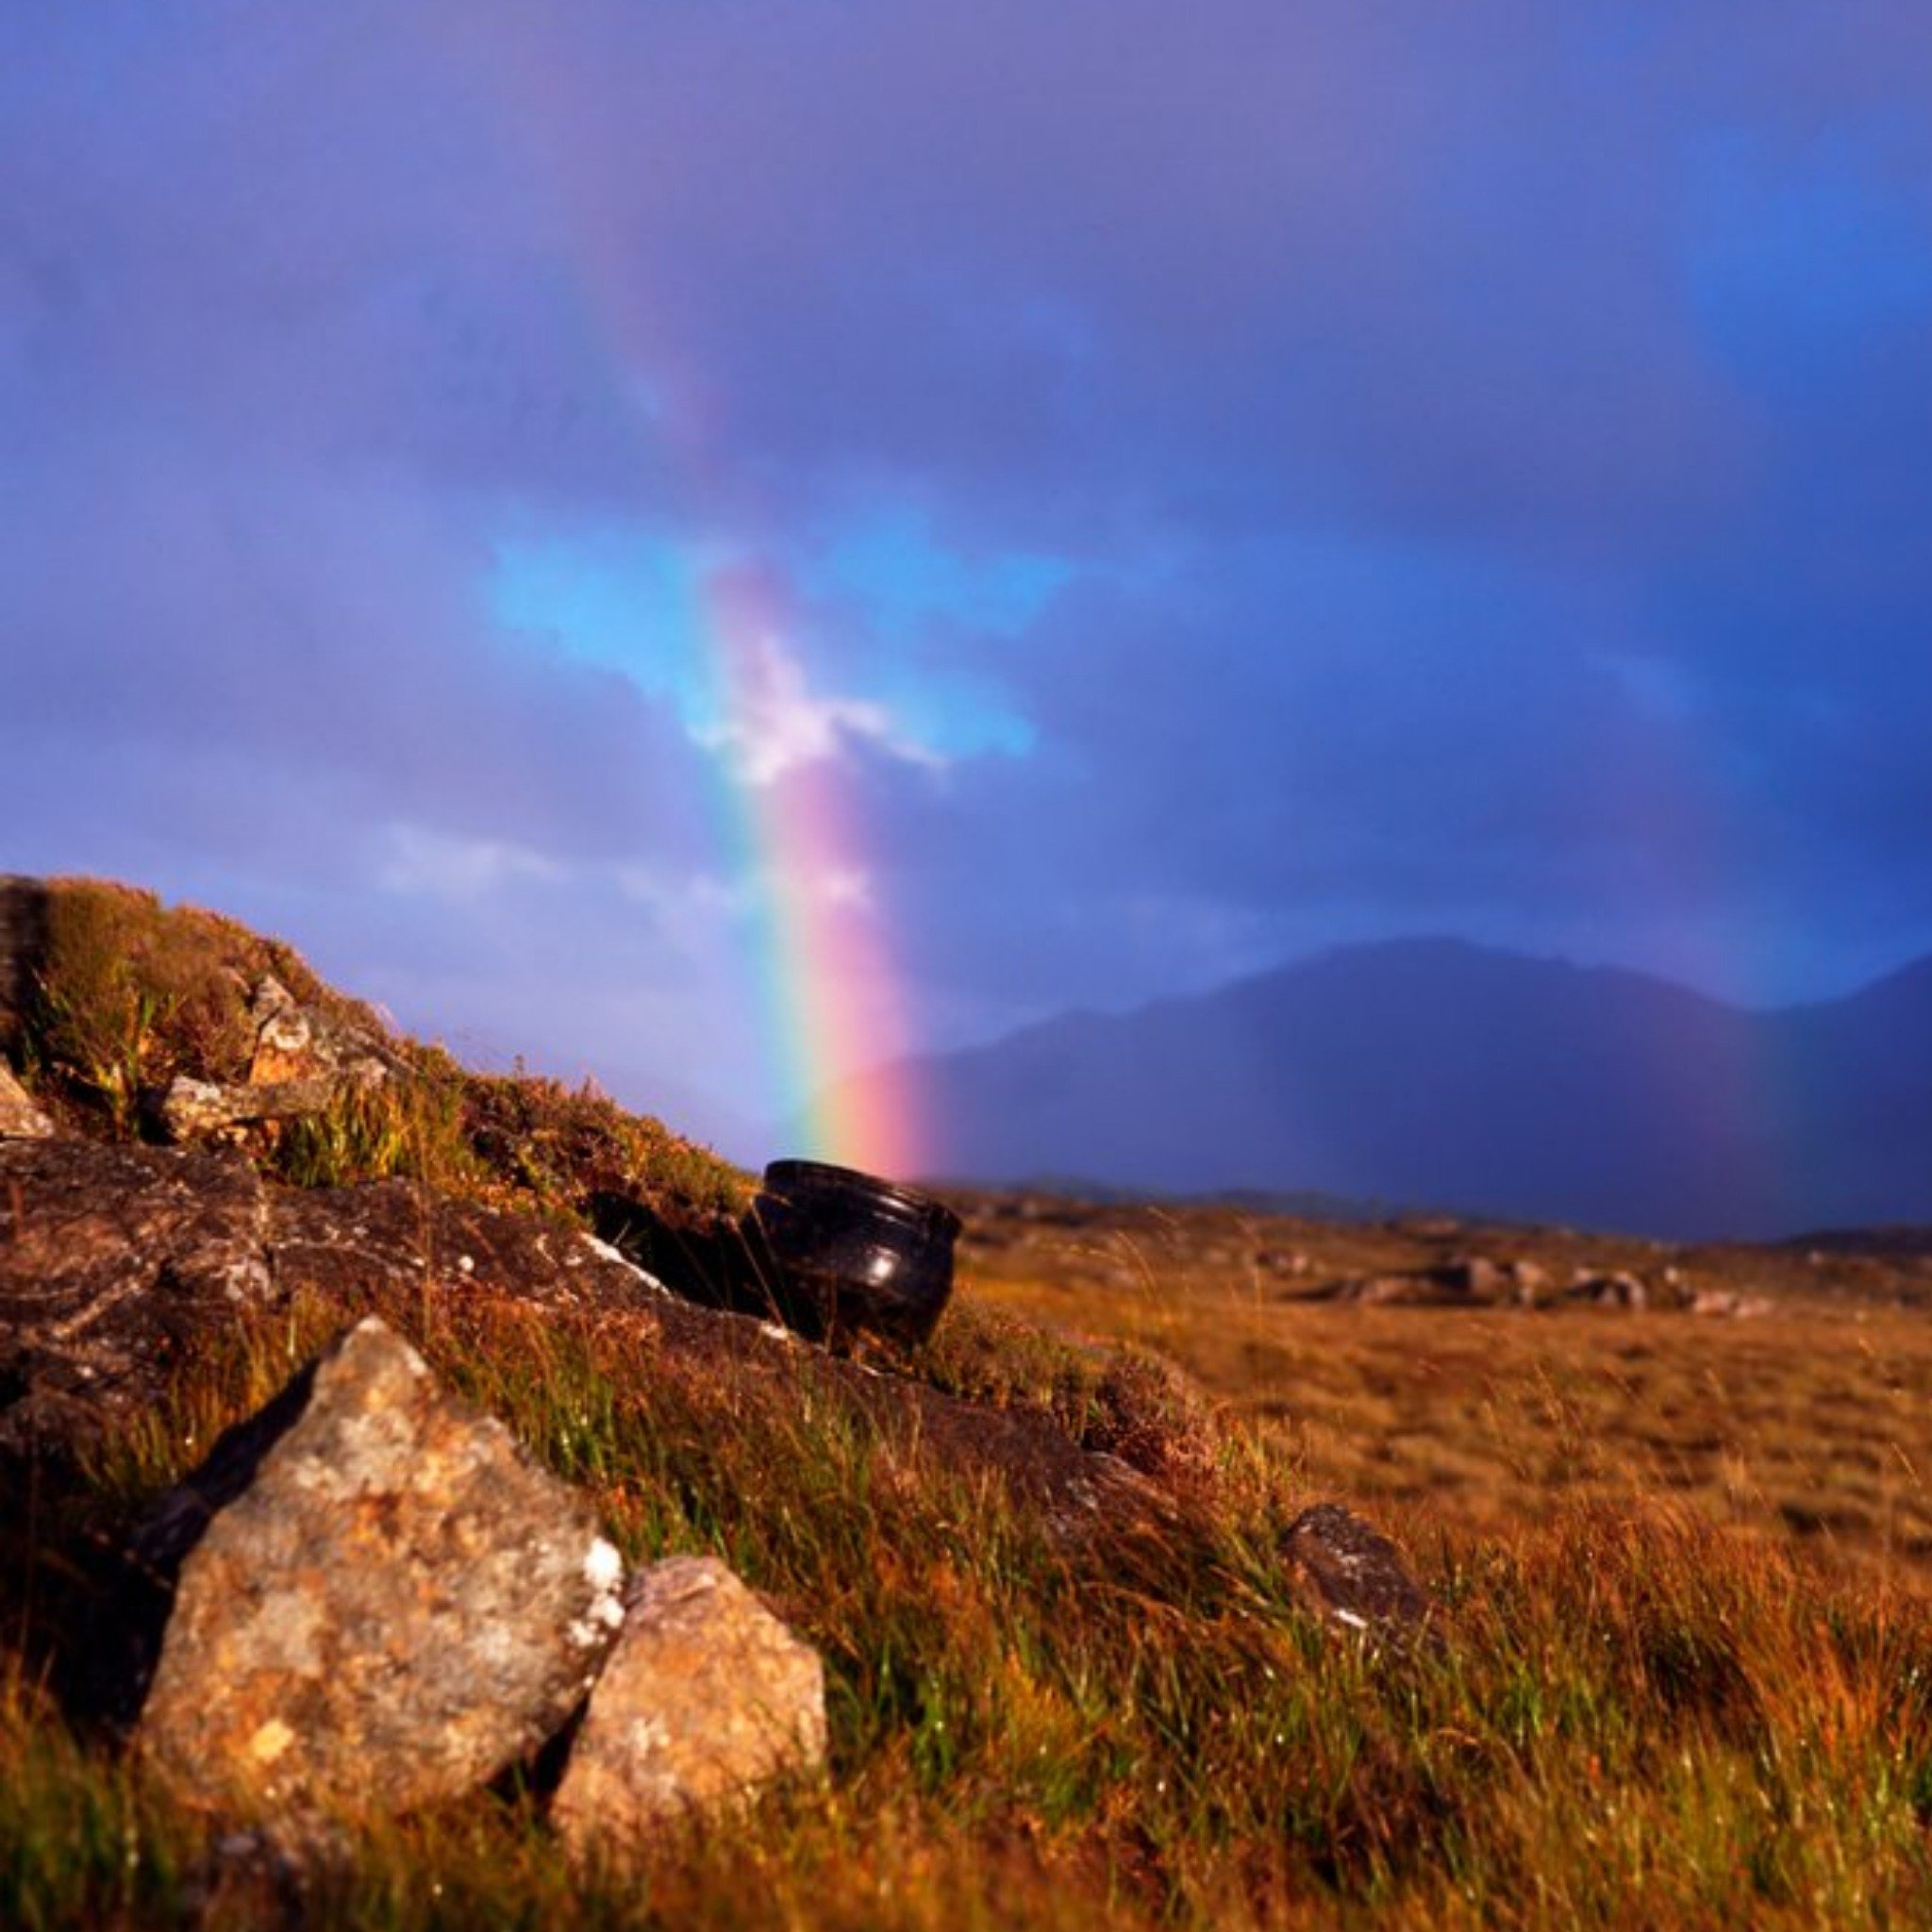 Moonpig Photographic Image Of A Crock Of Gold At The End Of The Rainbow Co Galway Ireland Card, Larg